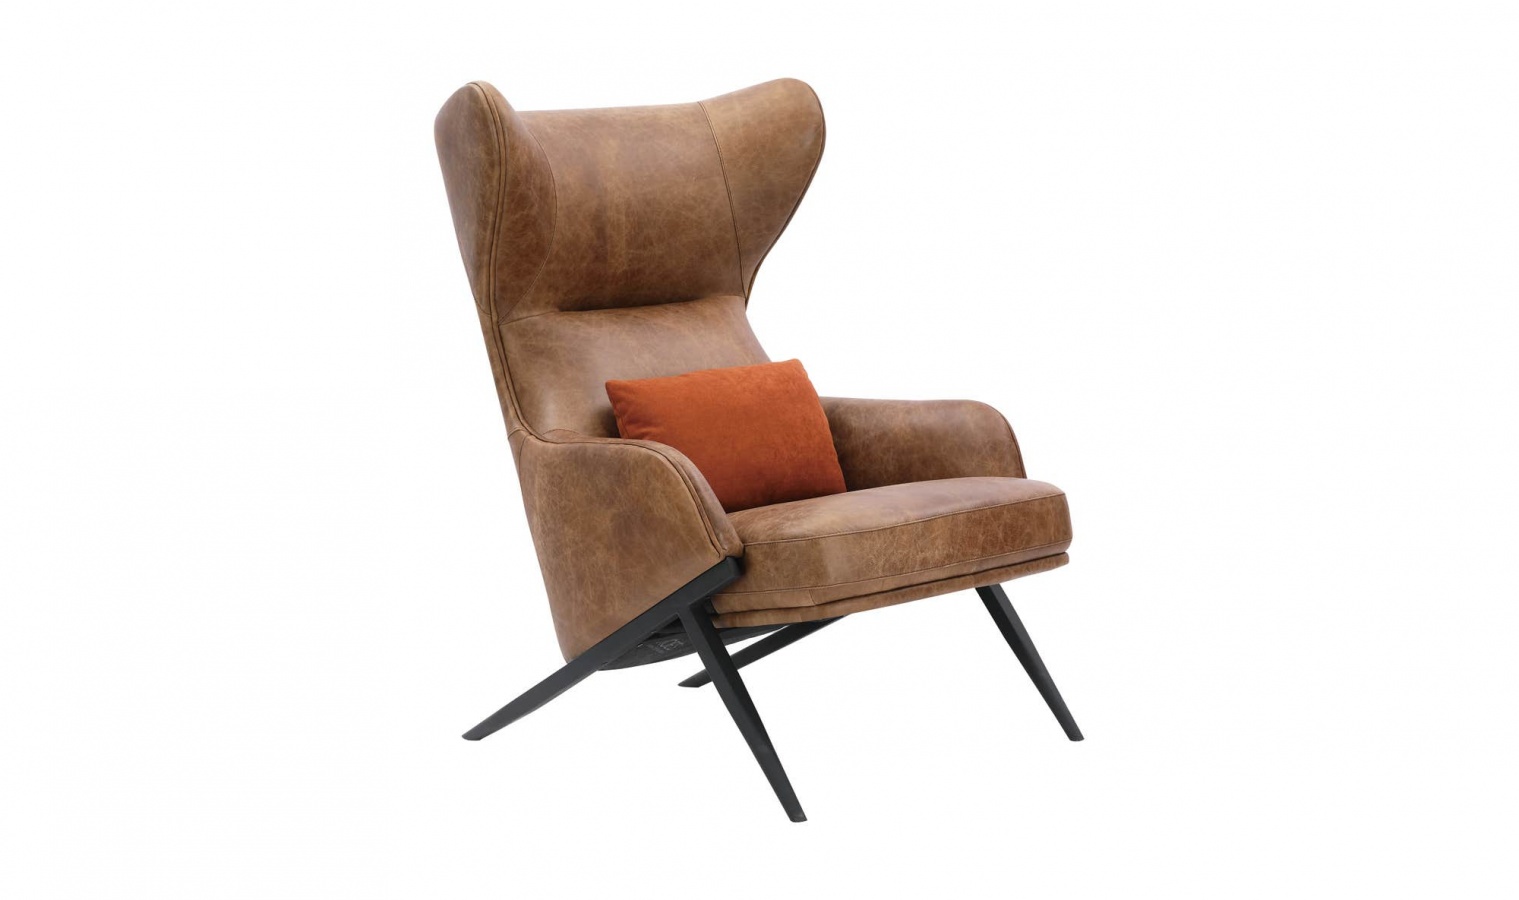 Amos Leather Accent Chair